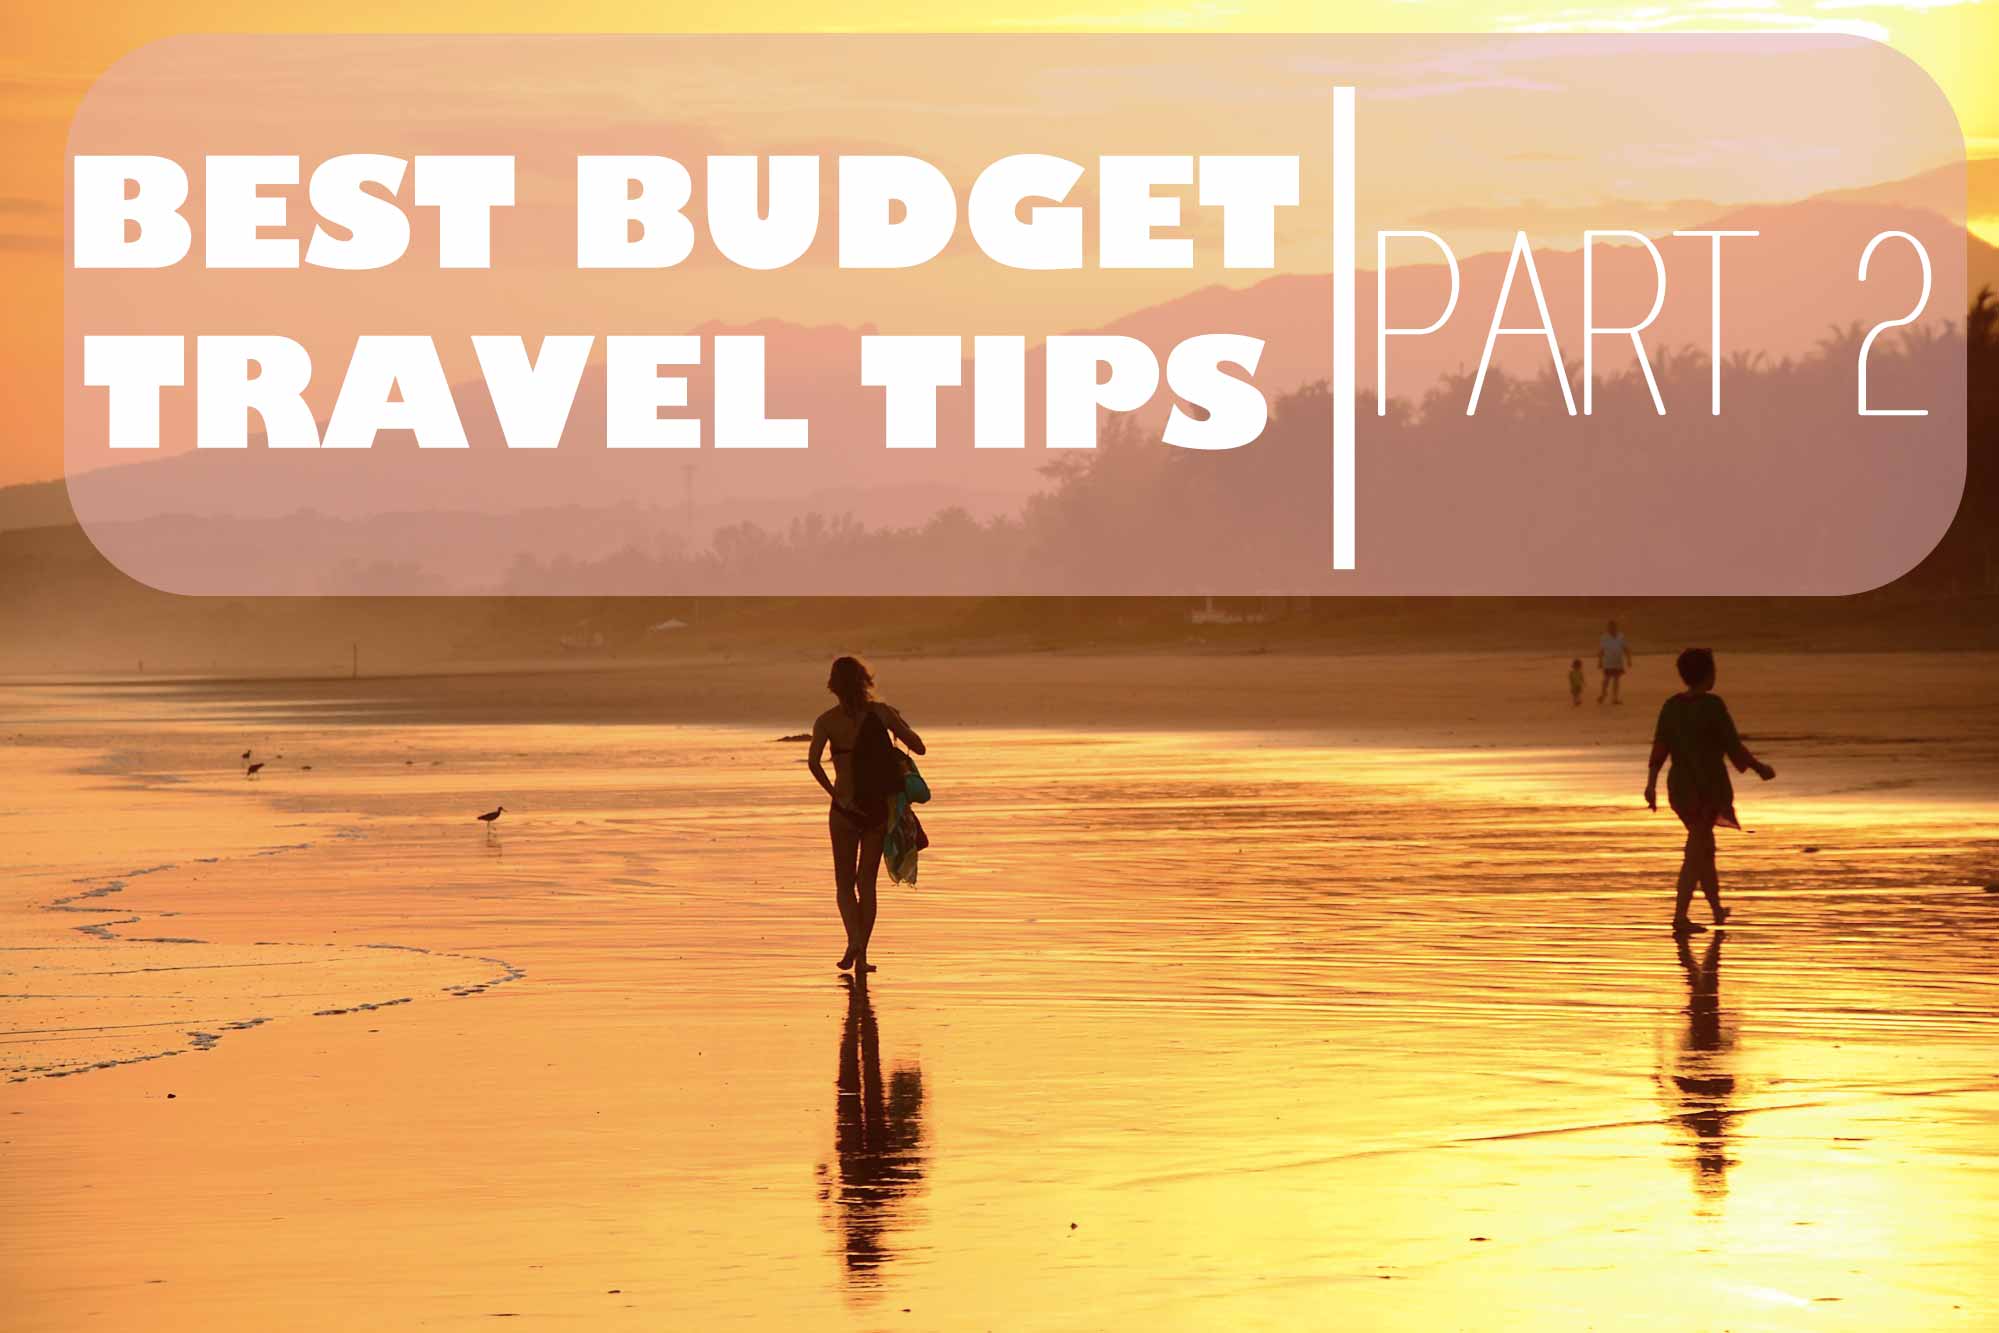 Best Budget Travel Tips From Our Favorite Bloggers Part 2